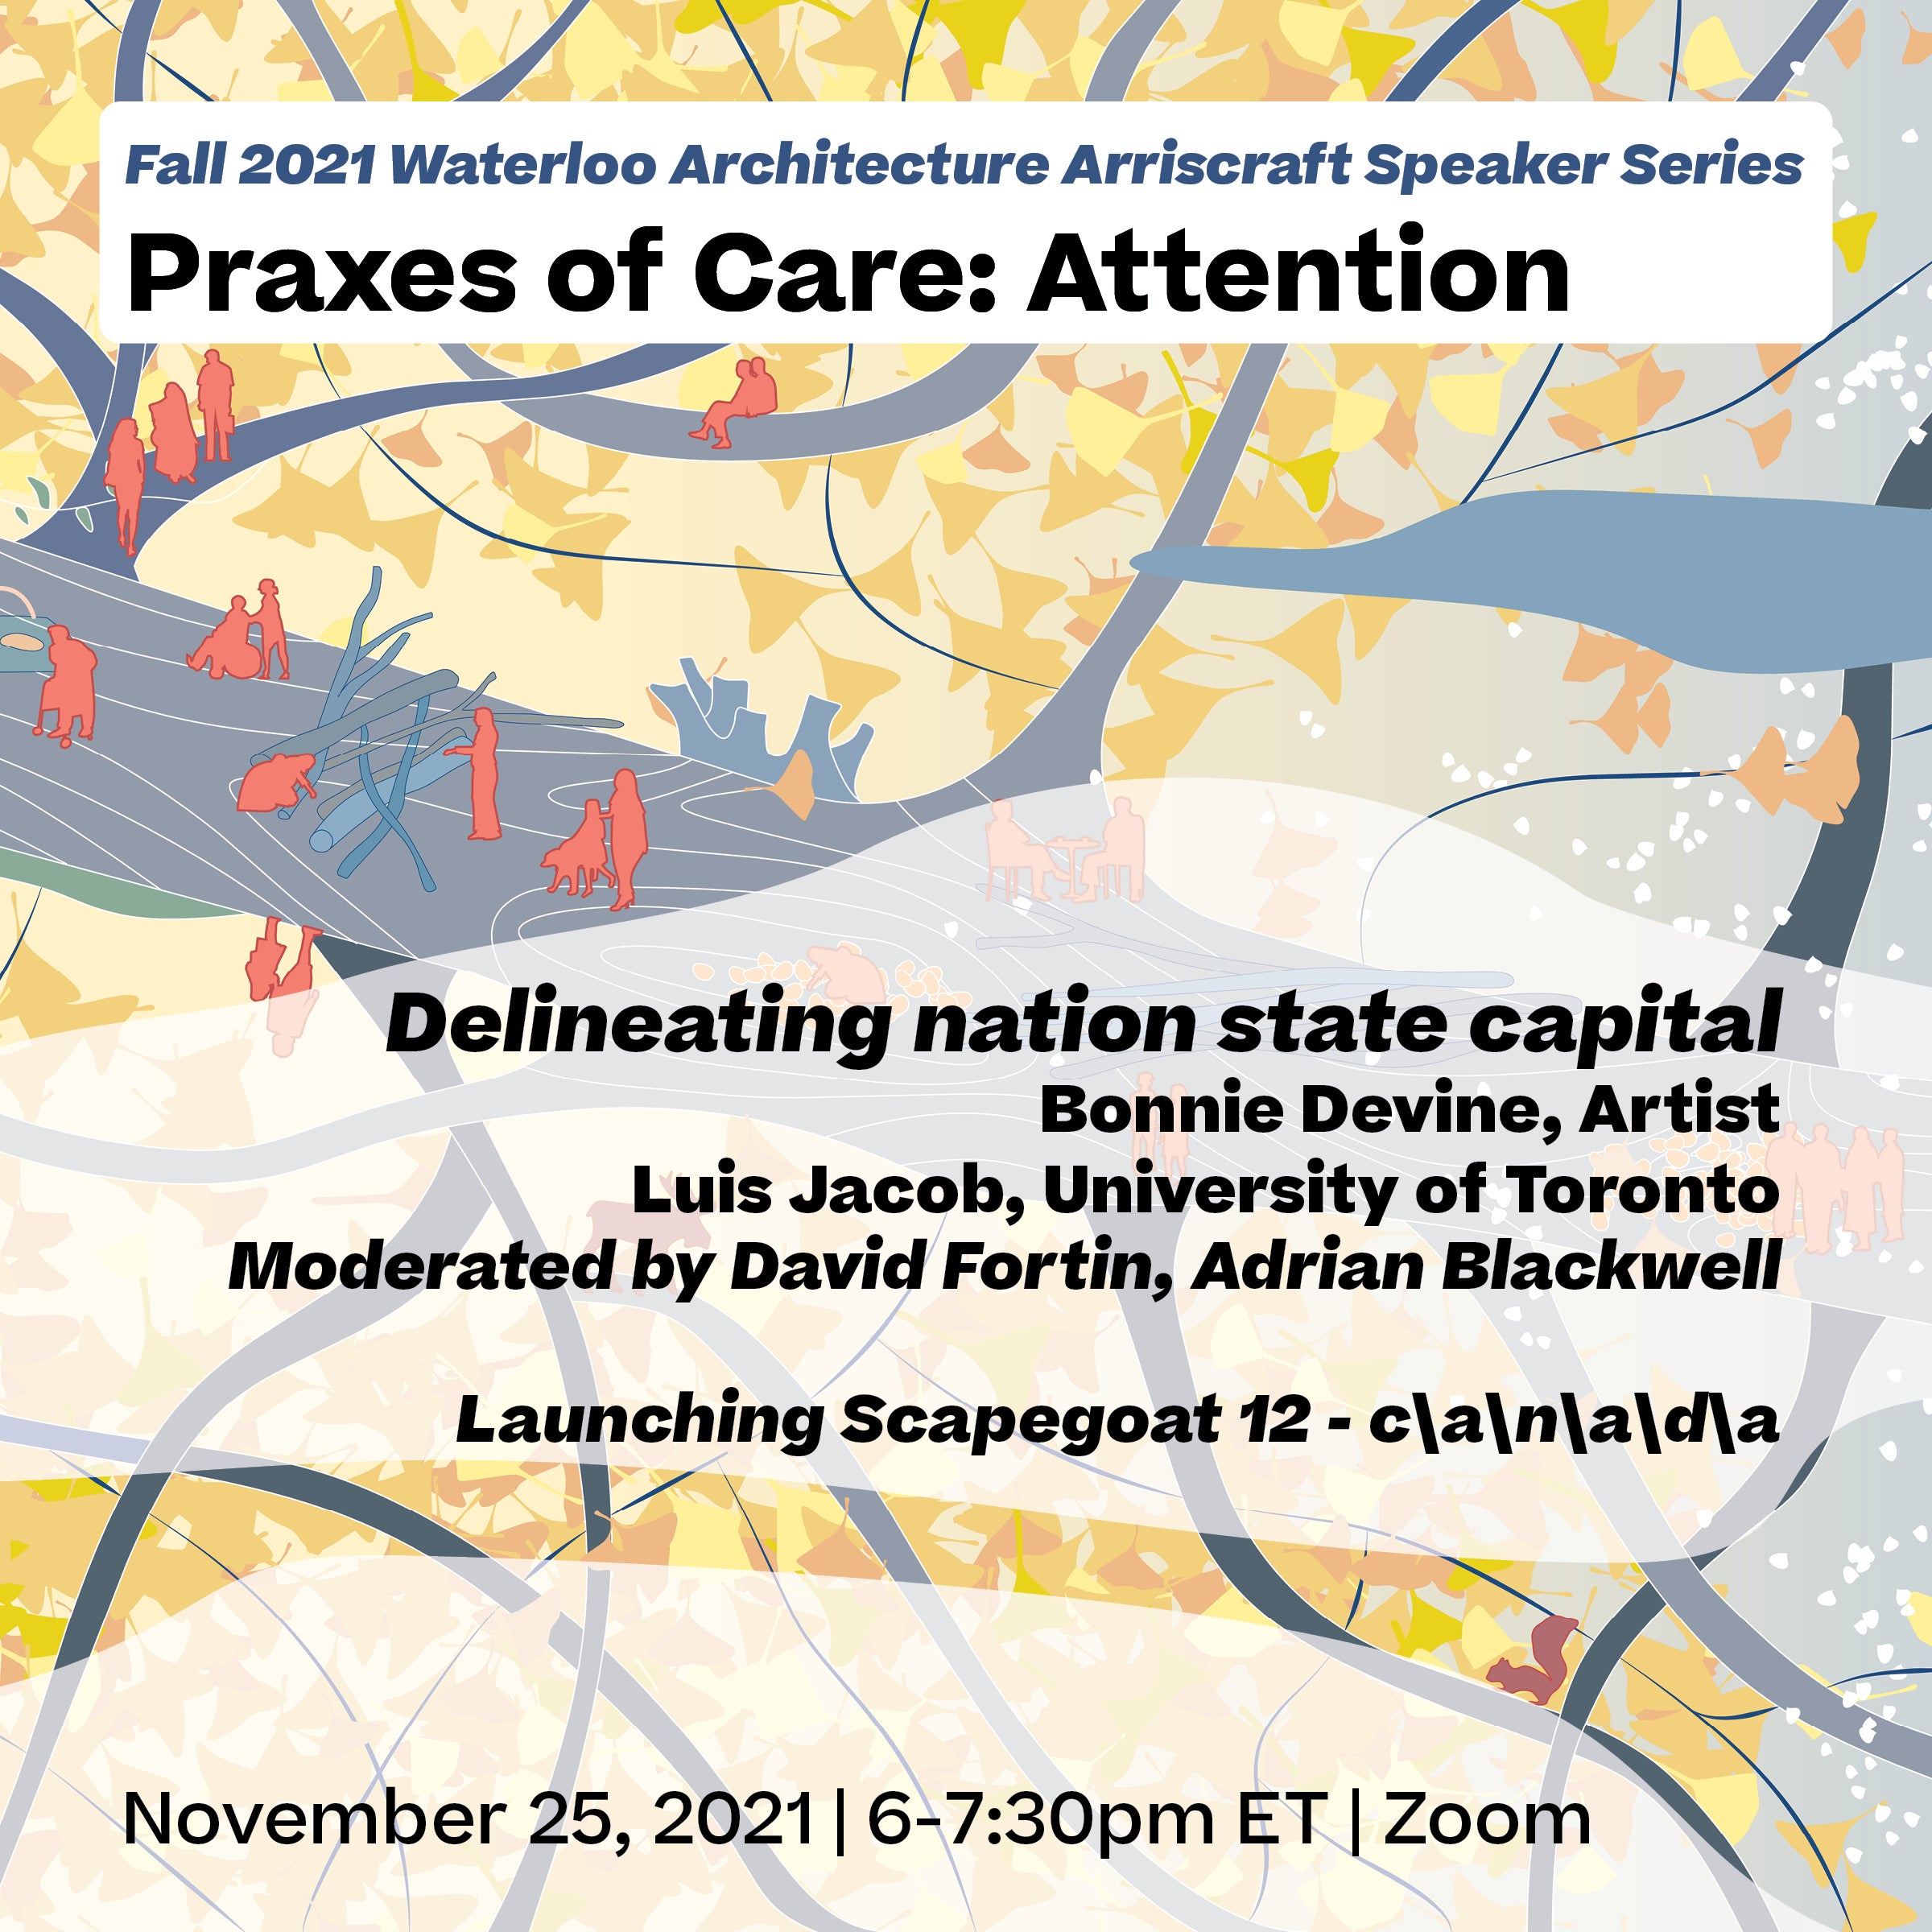 Praxes of Care: Delineating nation state capital — Bonnie Devine & Luis Jacob